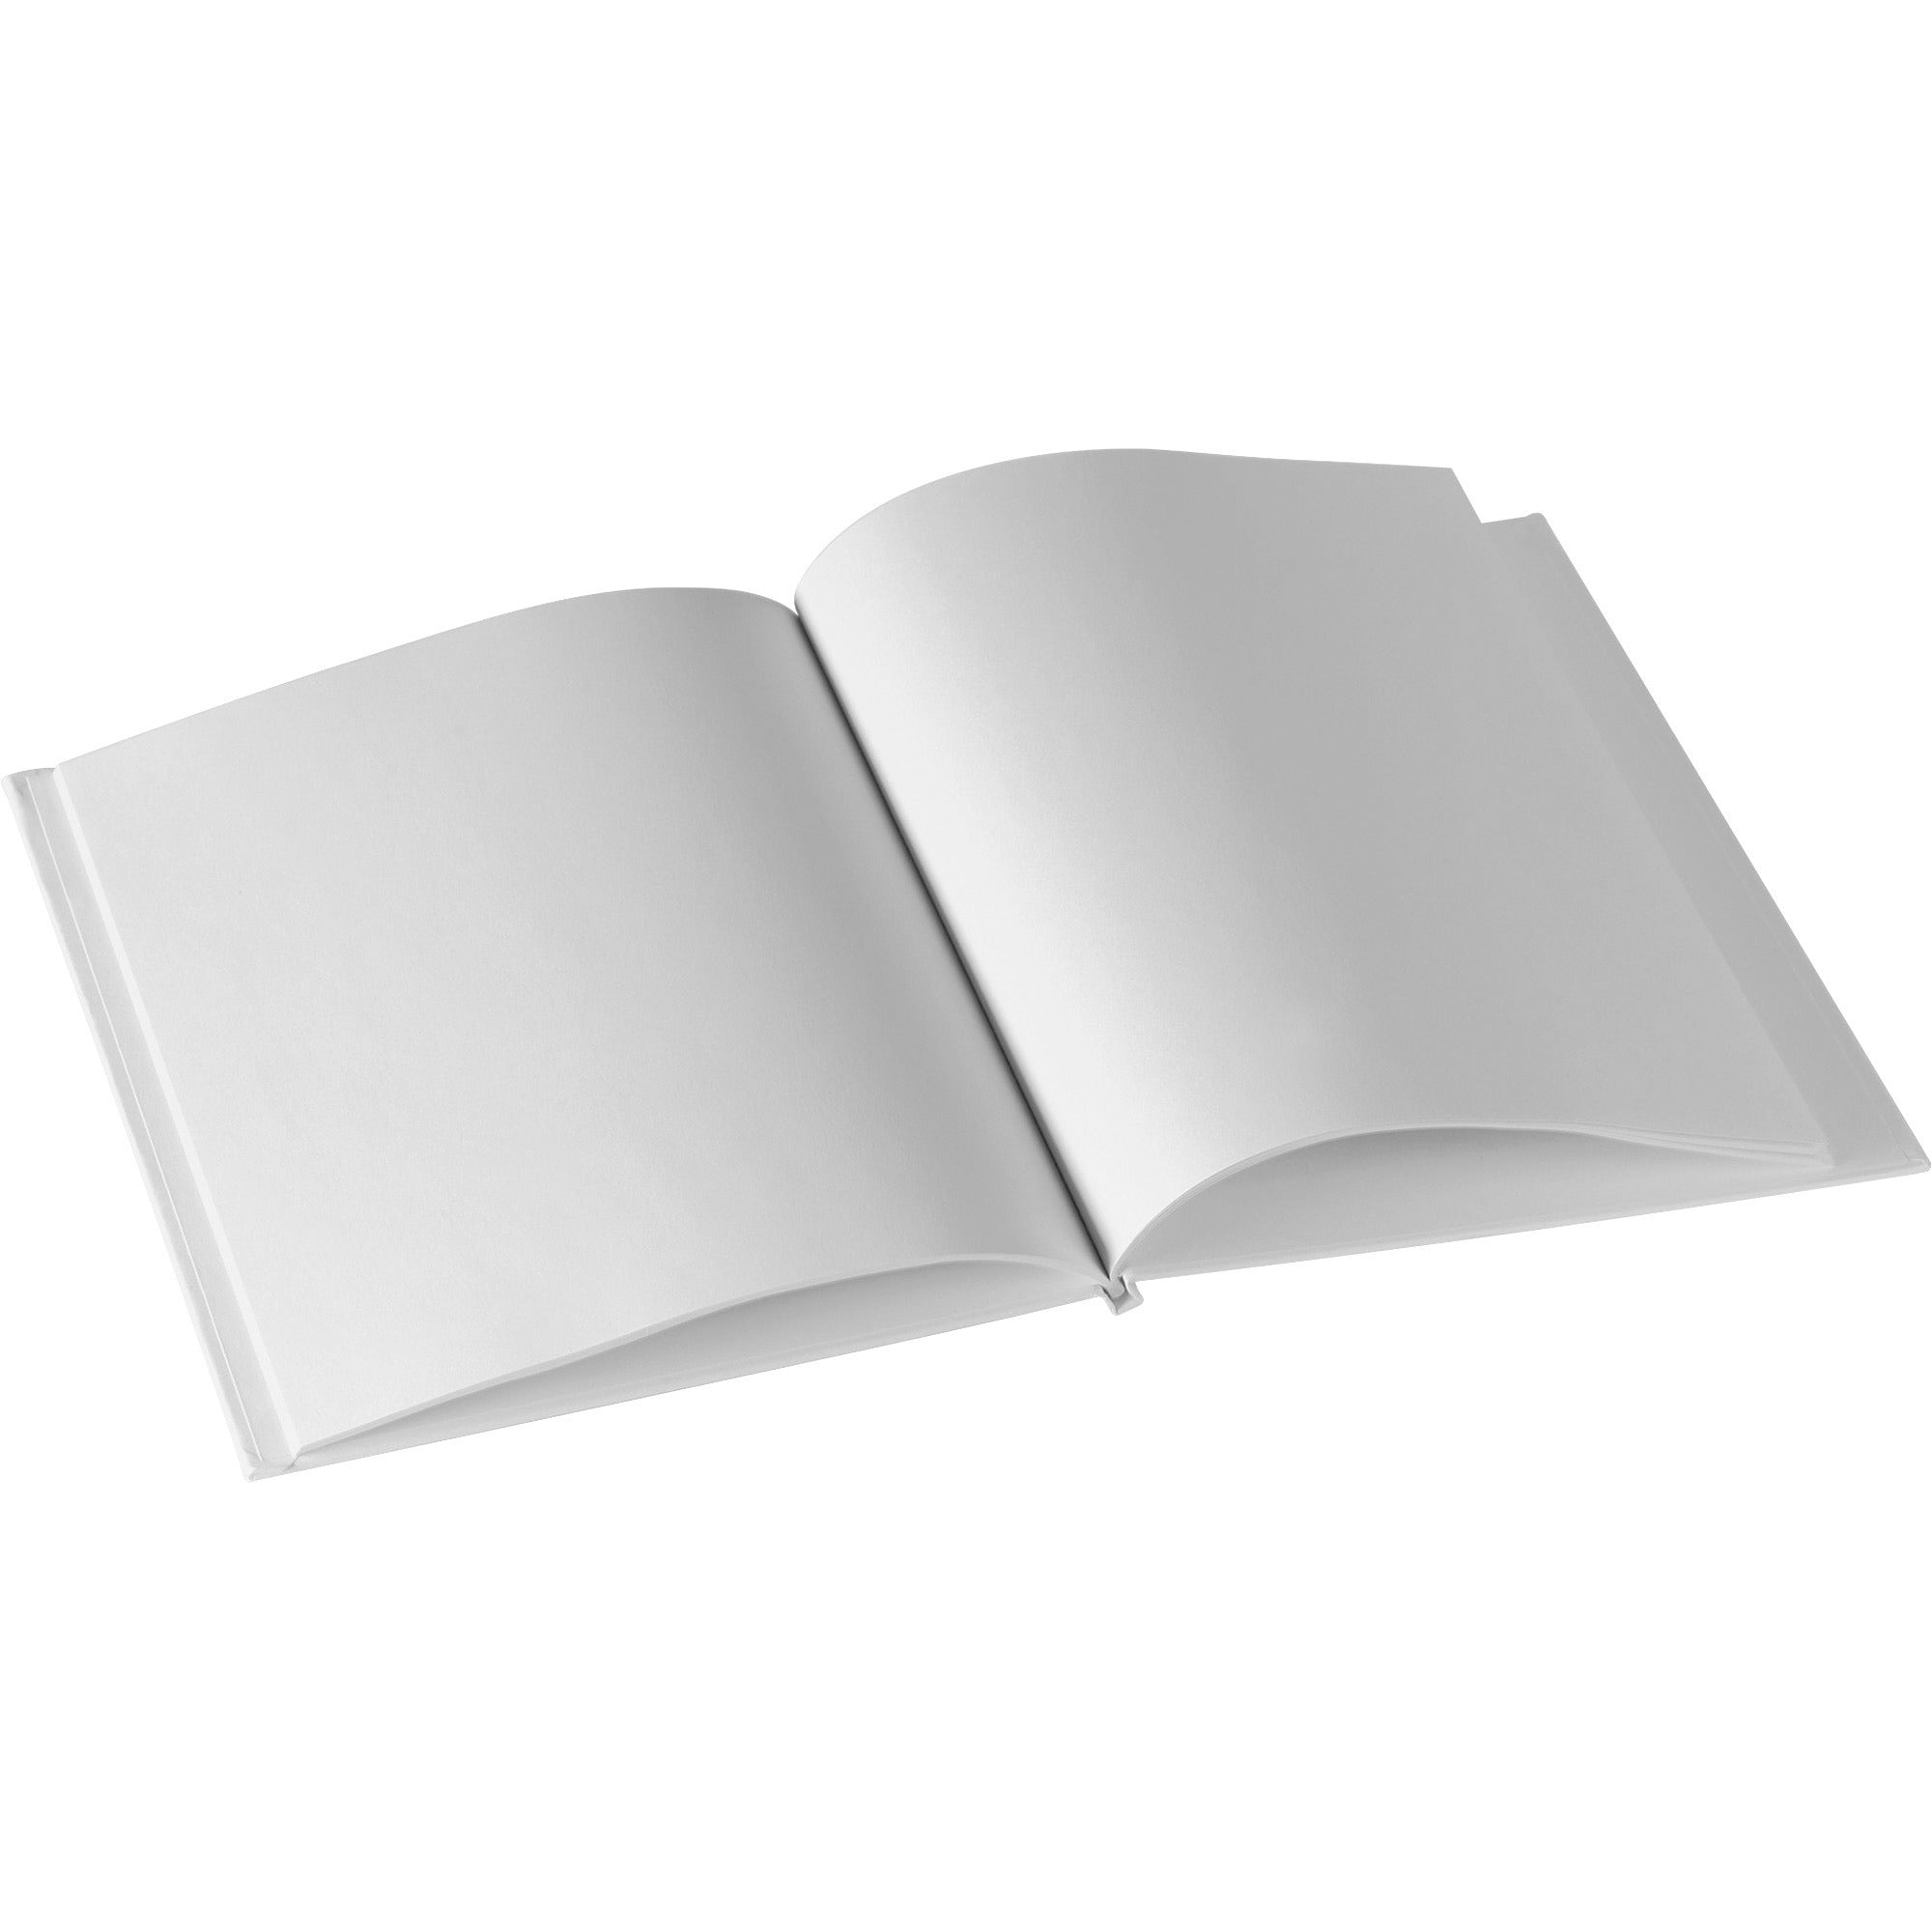 ashley-hardcover-blank-book-28-pages-plain-6-x-8-white-paper-hard-cover-durable-1-each_ash10700 - 1